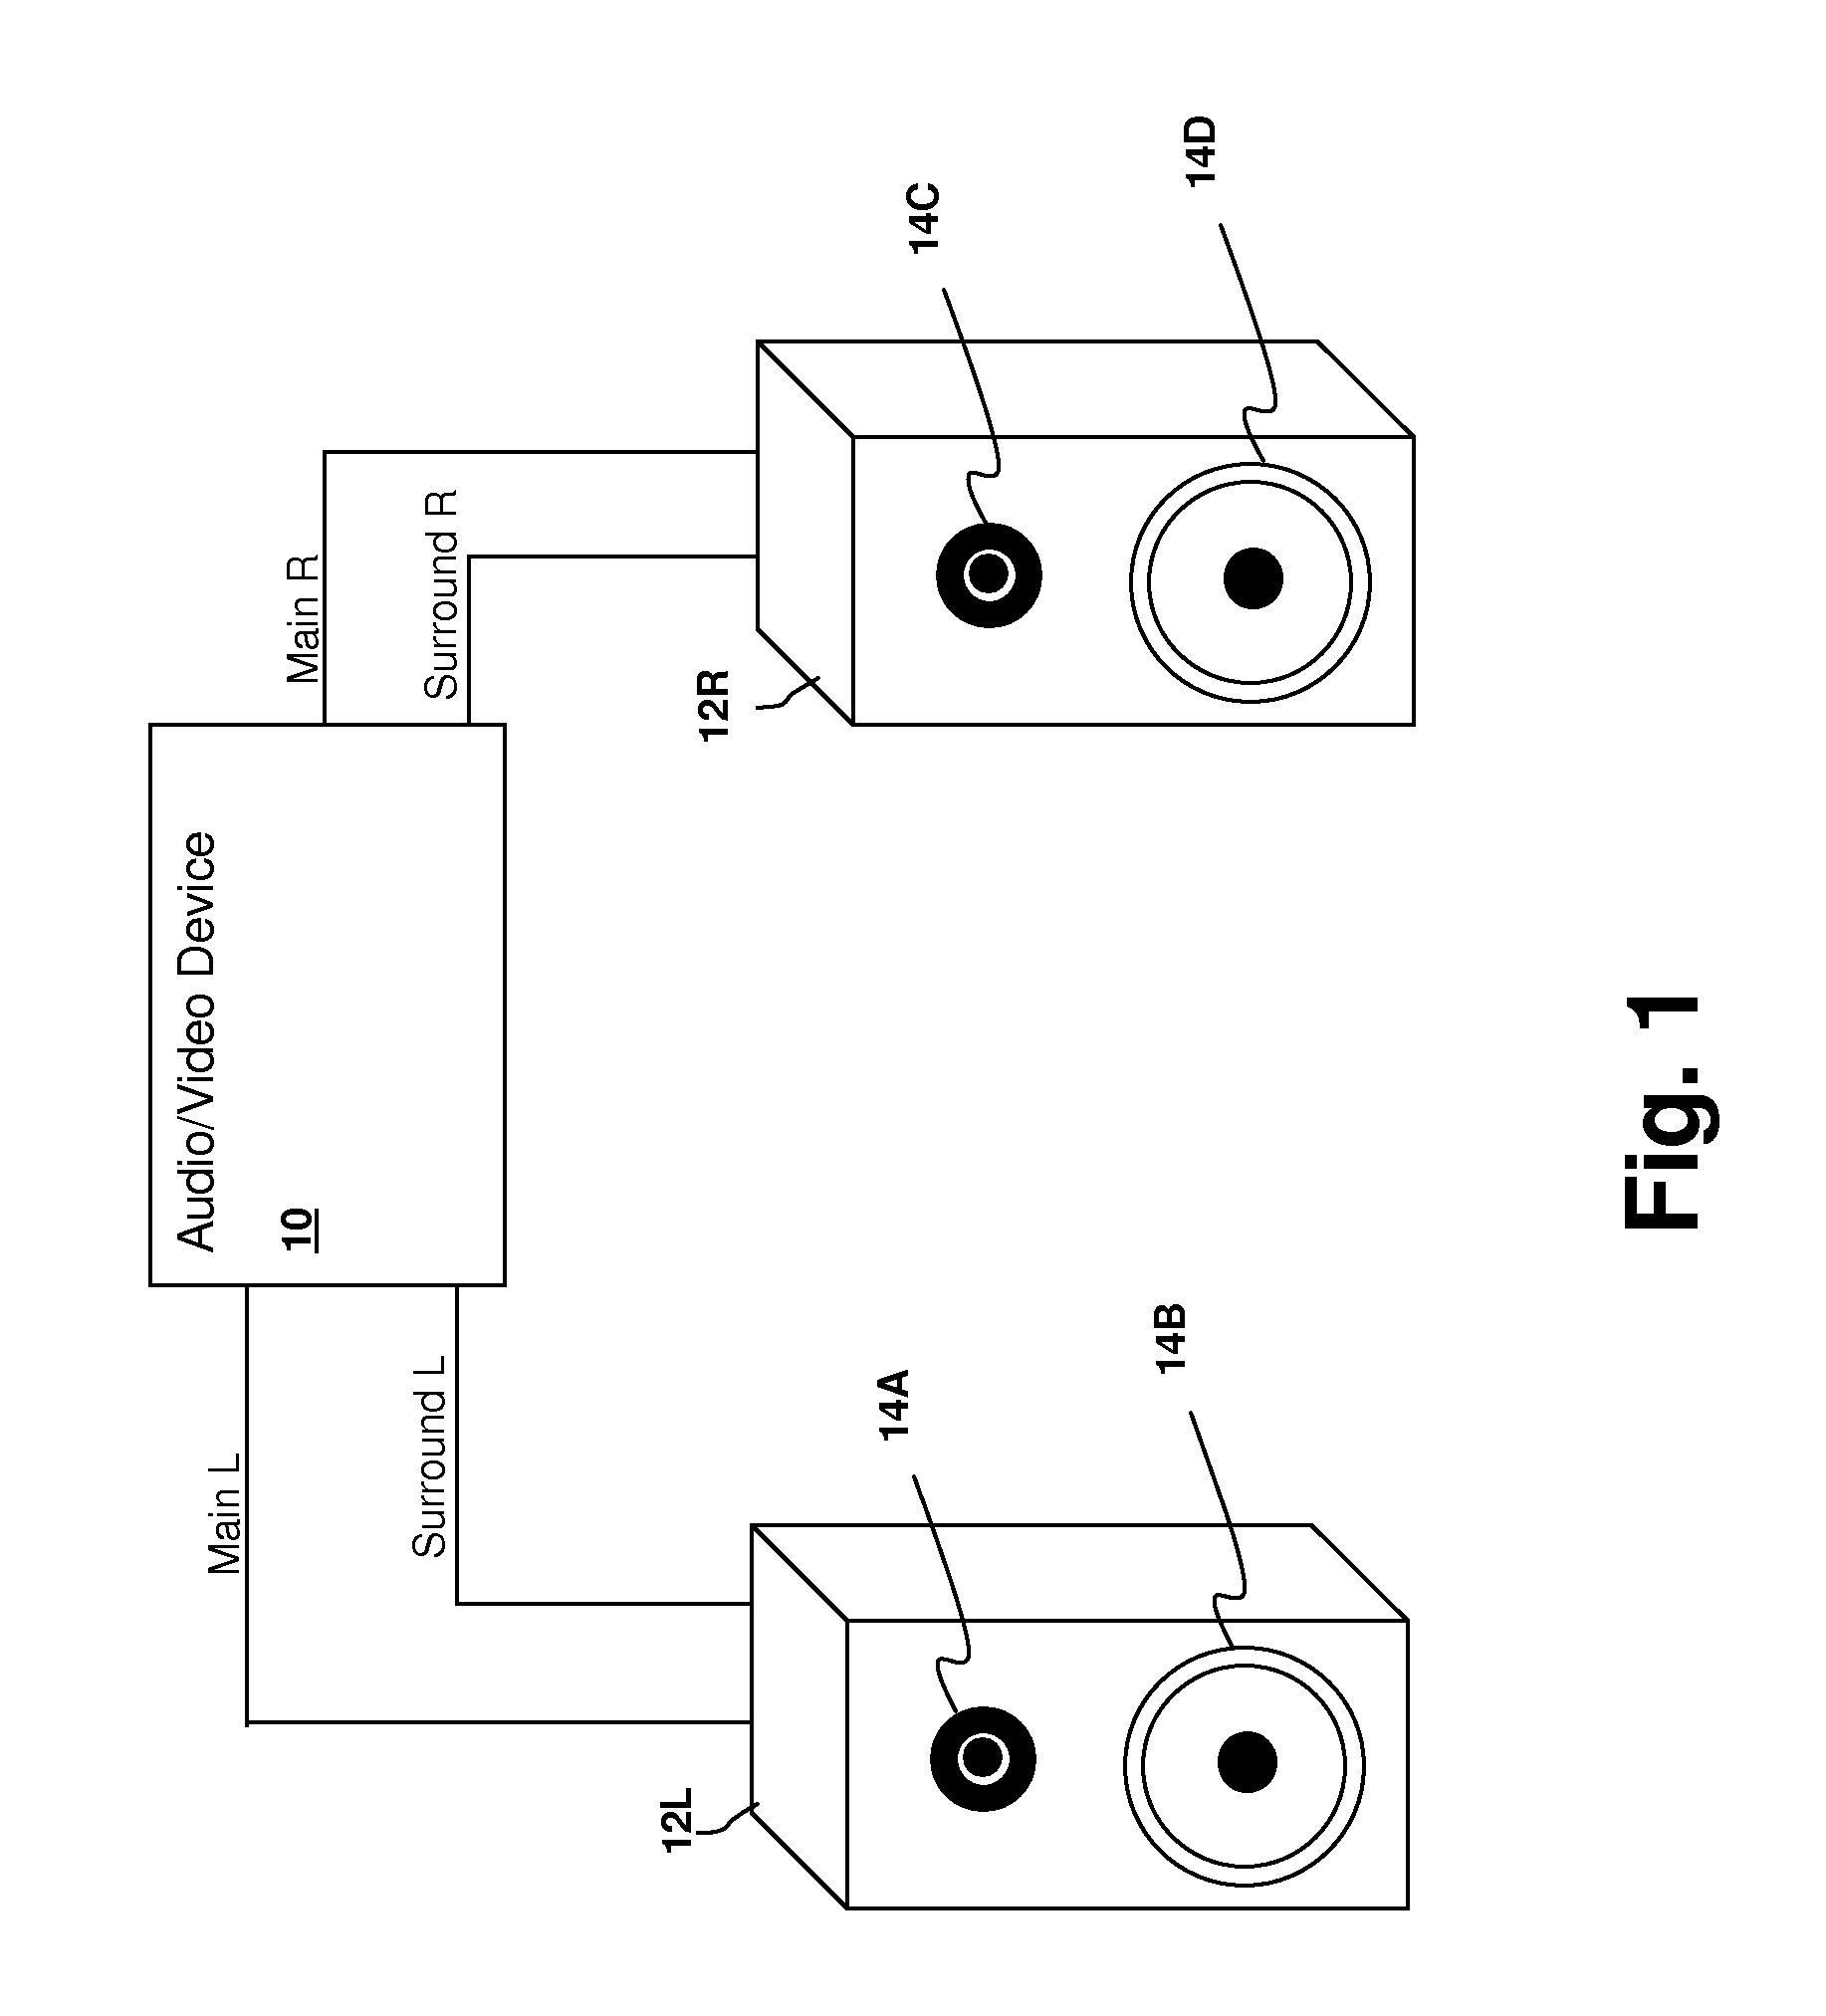 Method and system for surround sound beam-forming using the overlapping portion of driver frequency ranges